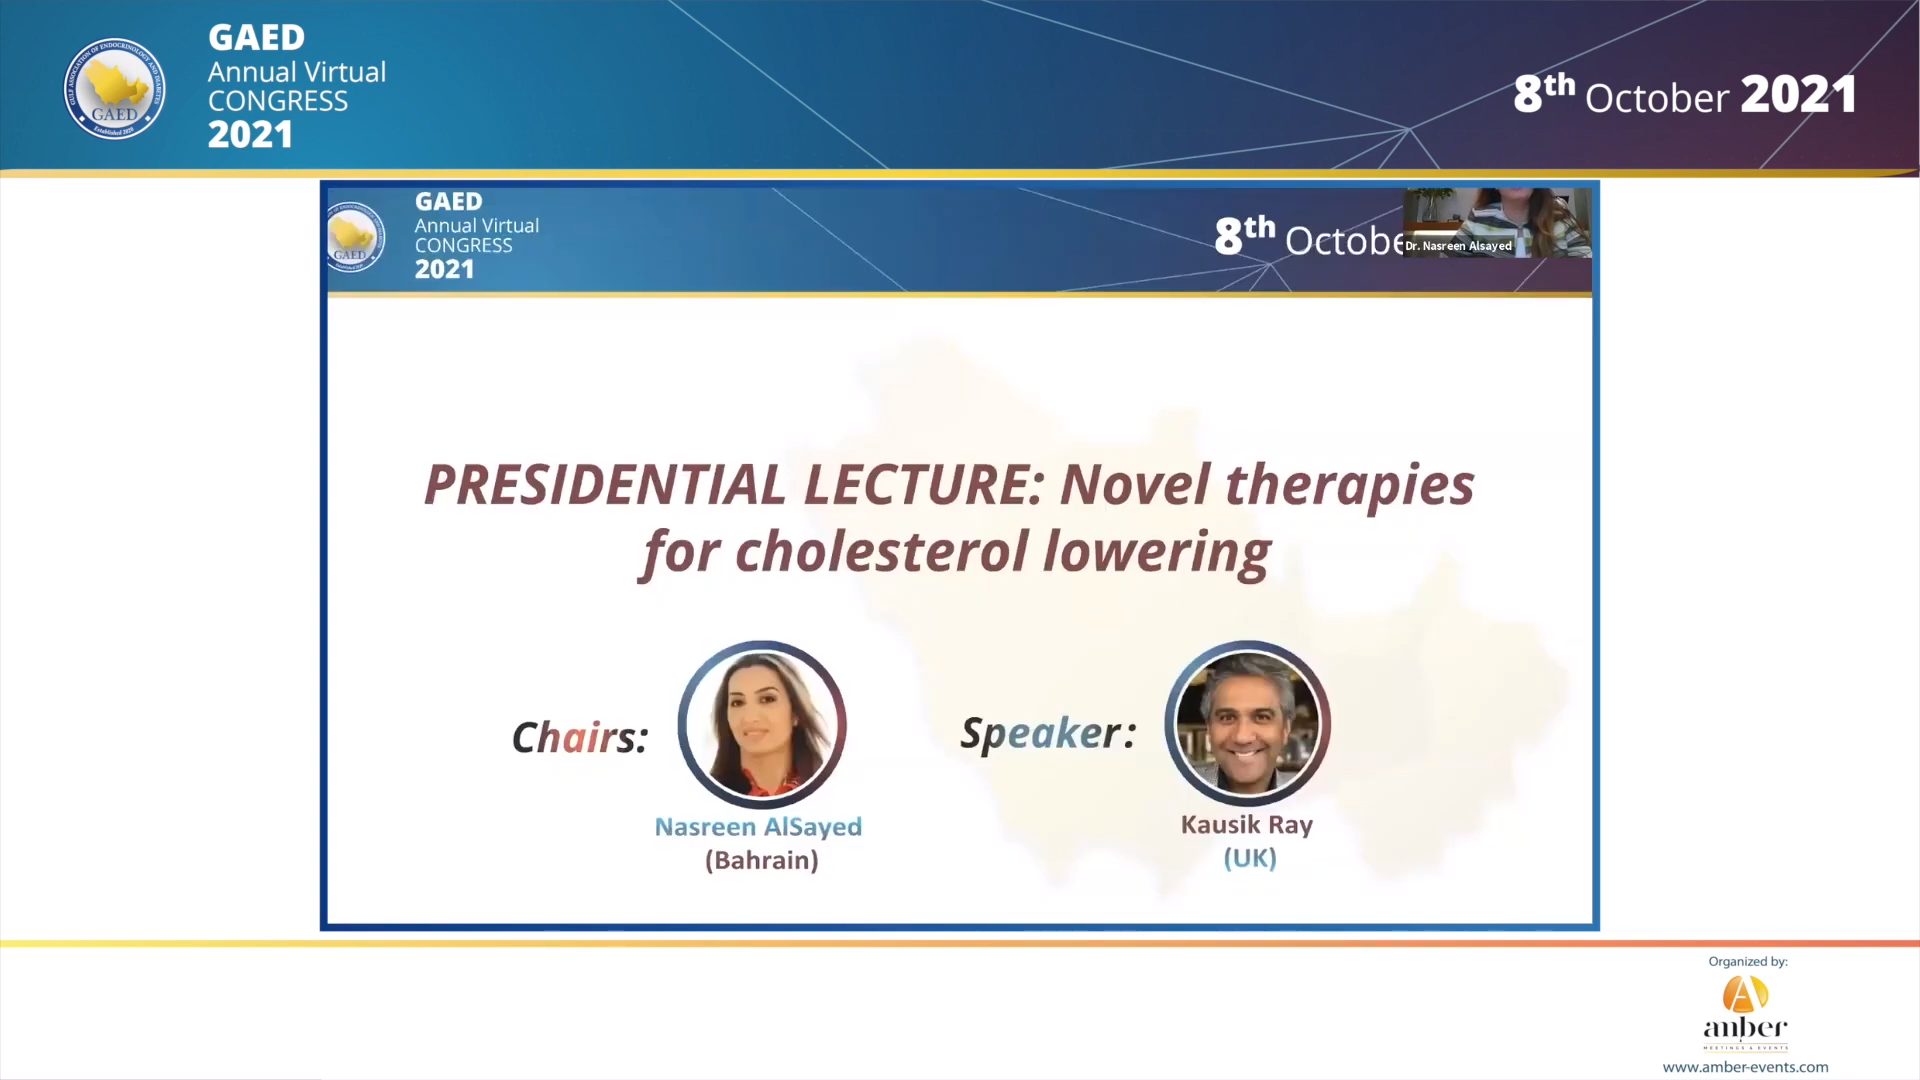 8.10.21 - Day 2, PRESIDENTIAL LECTURE - Novel therapies for Cholesterol Lowering